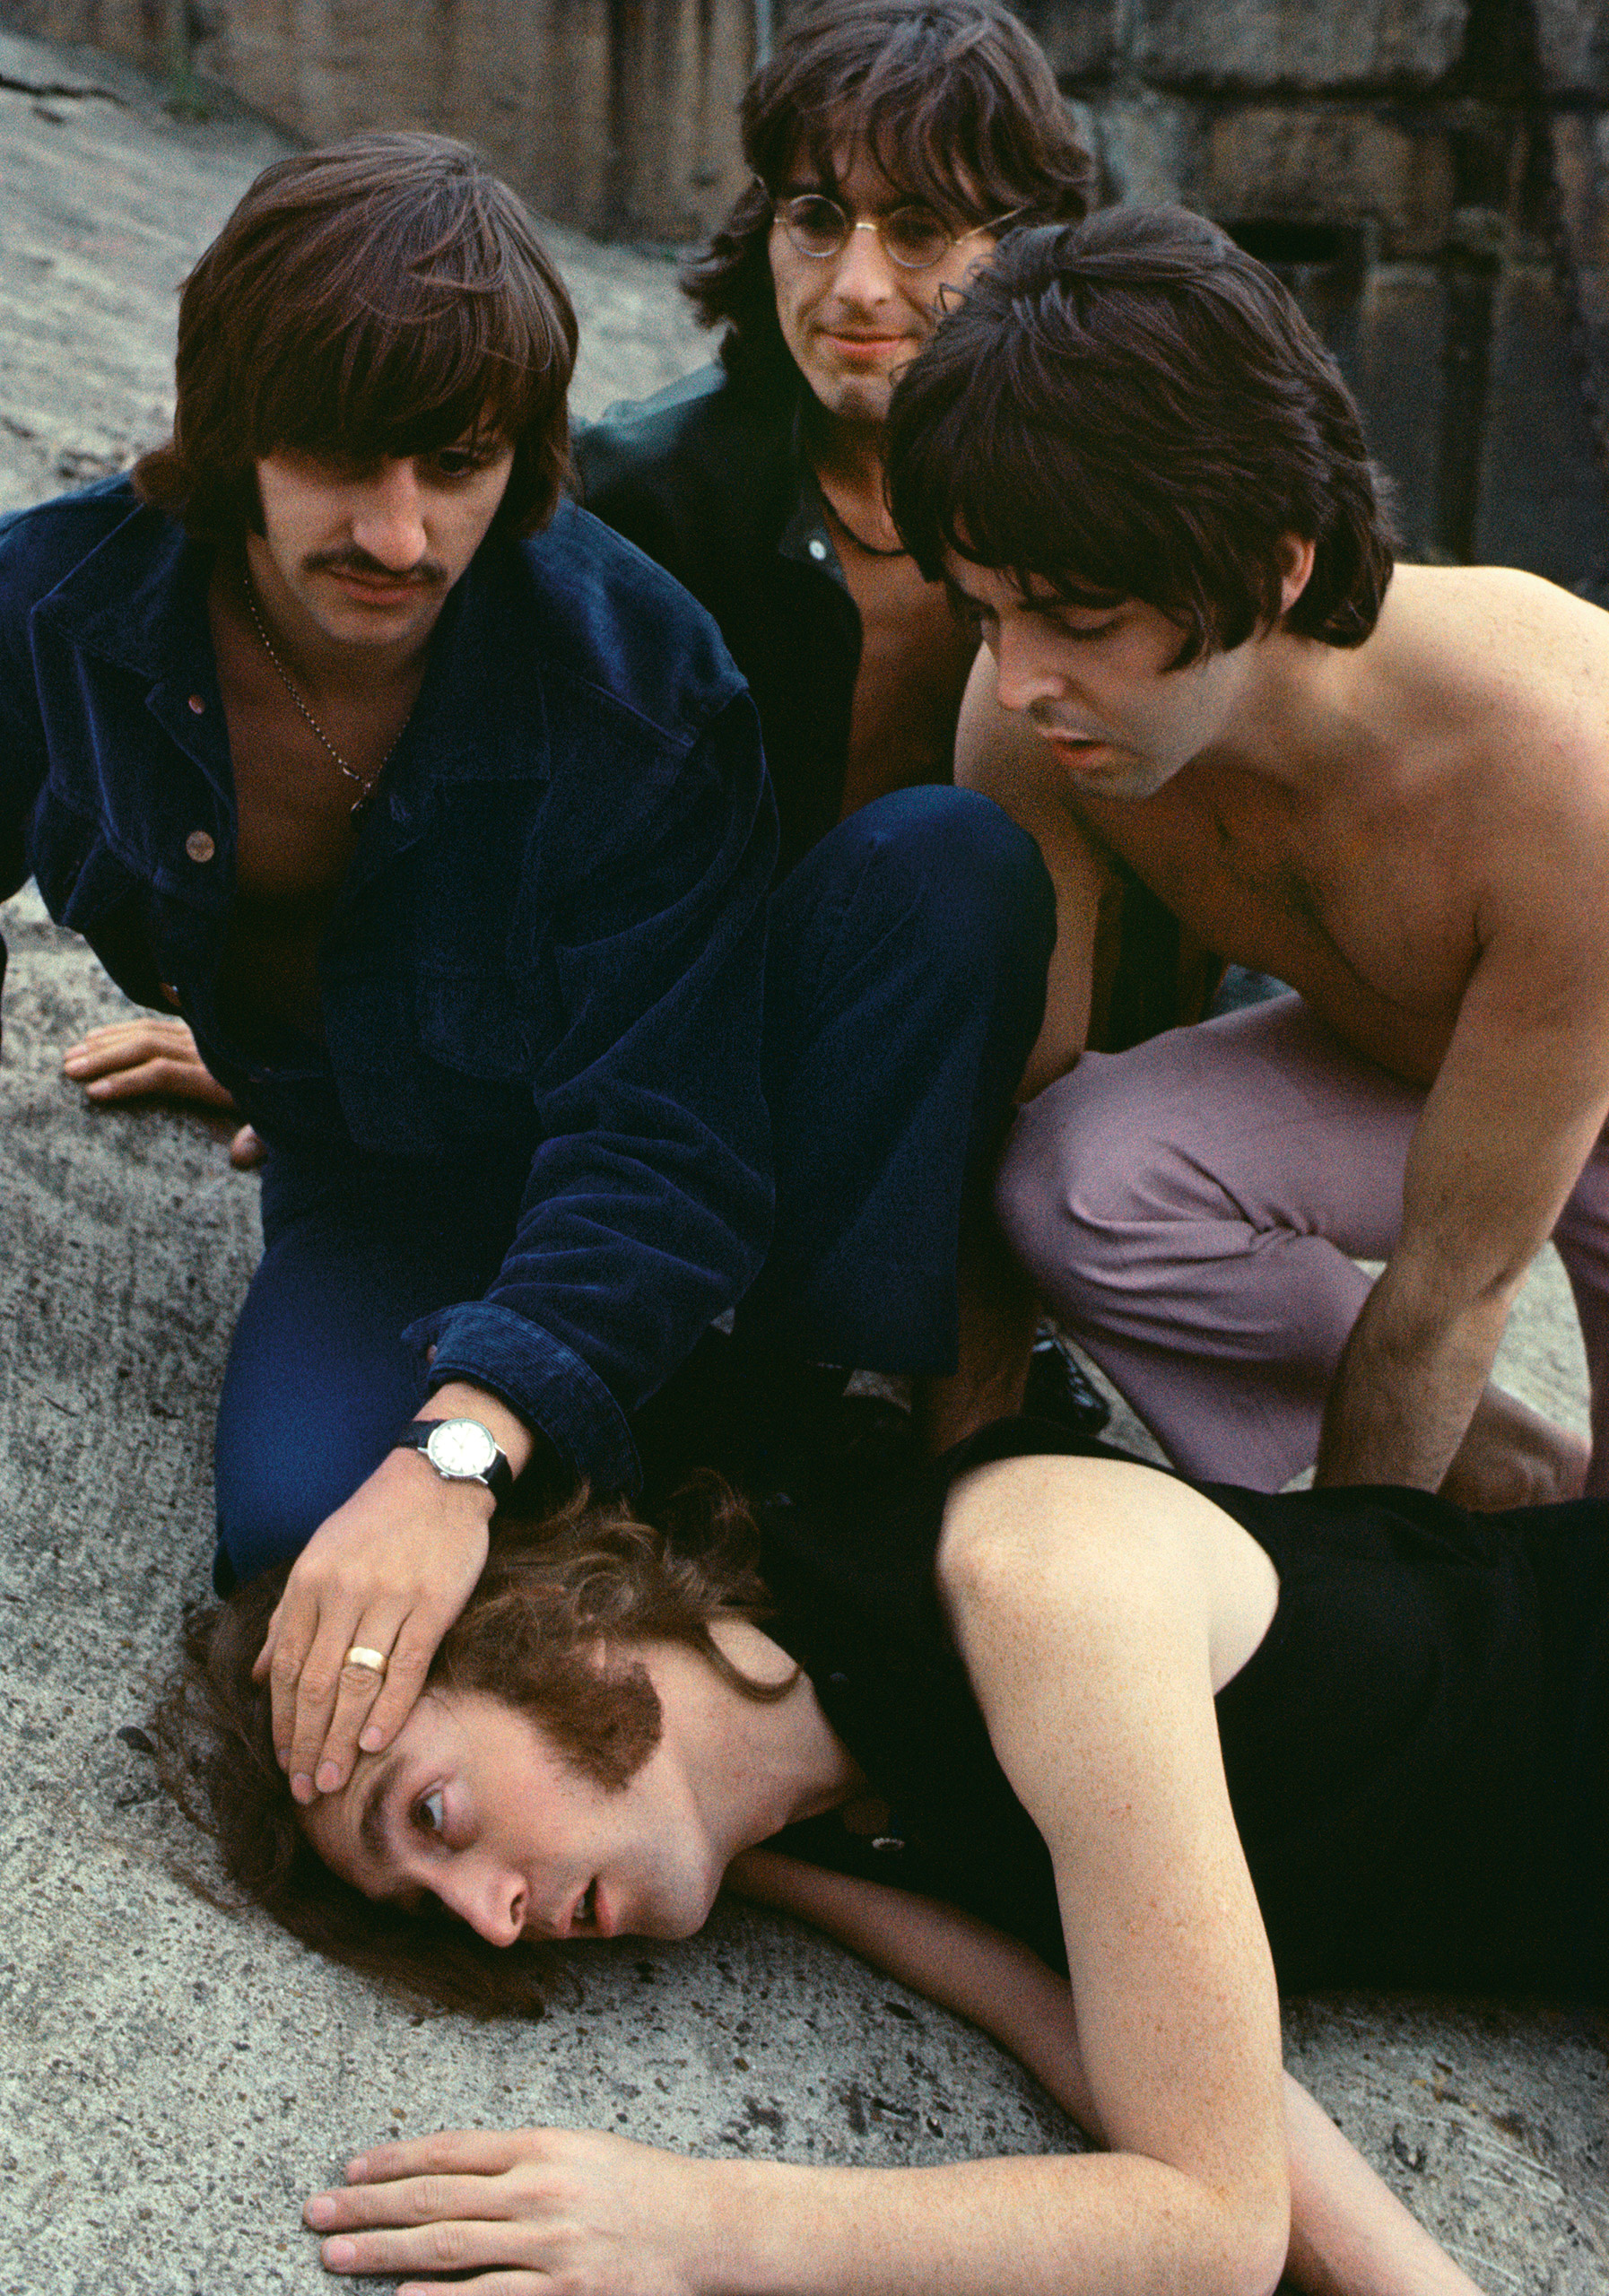 The Beatles Mad Day Out photoshoot in 1968.